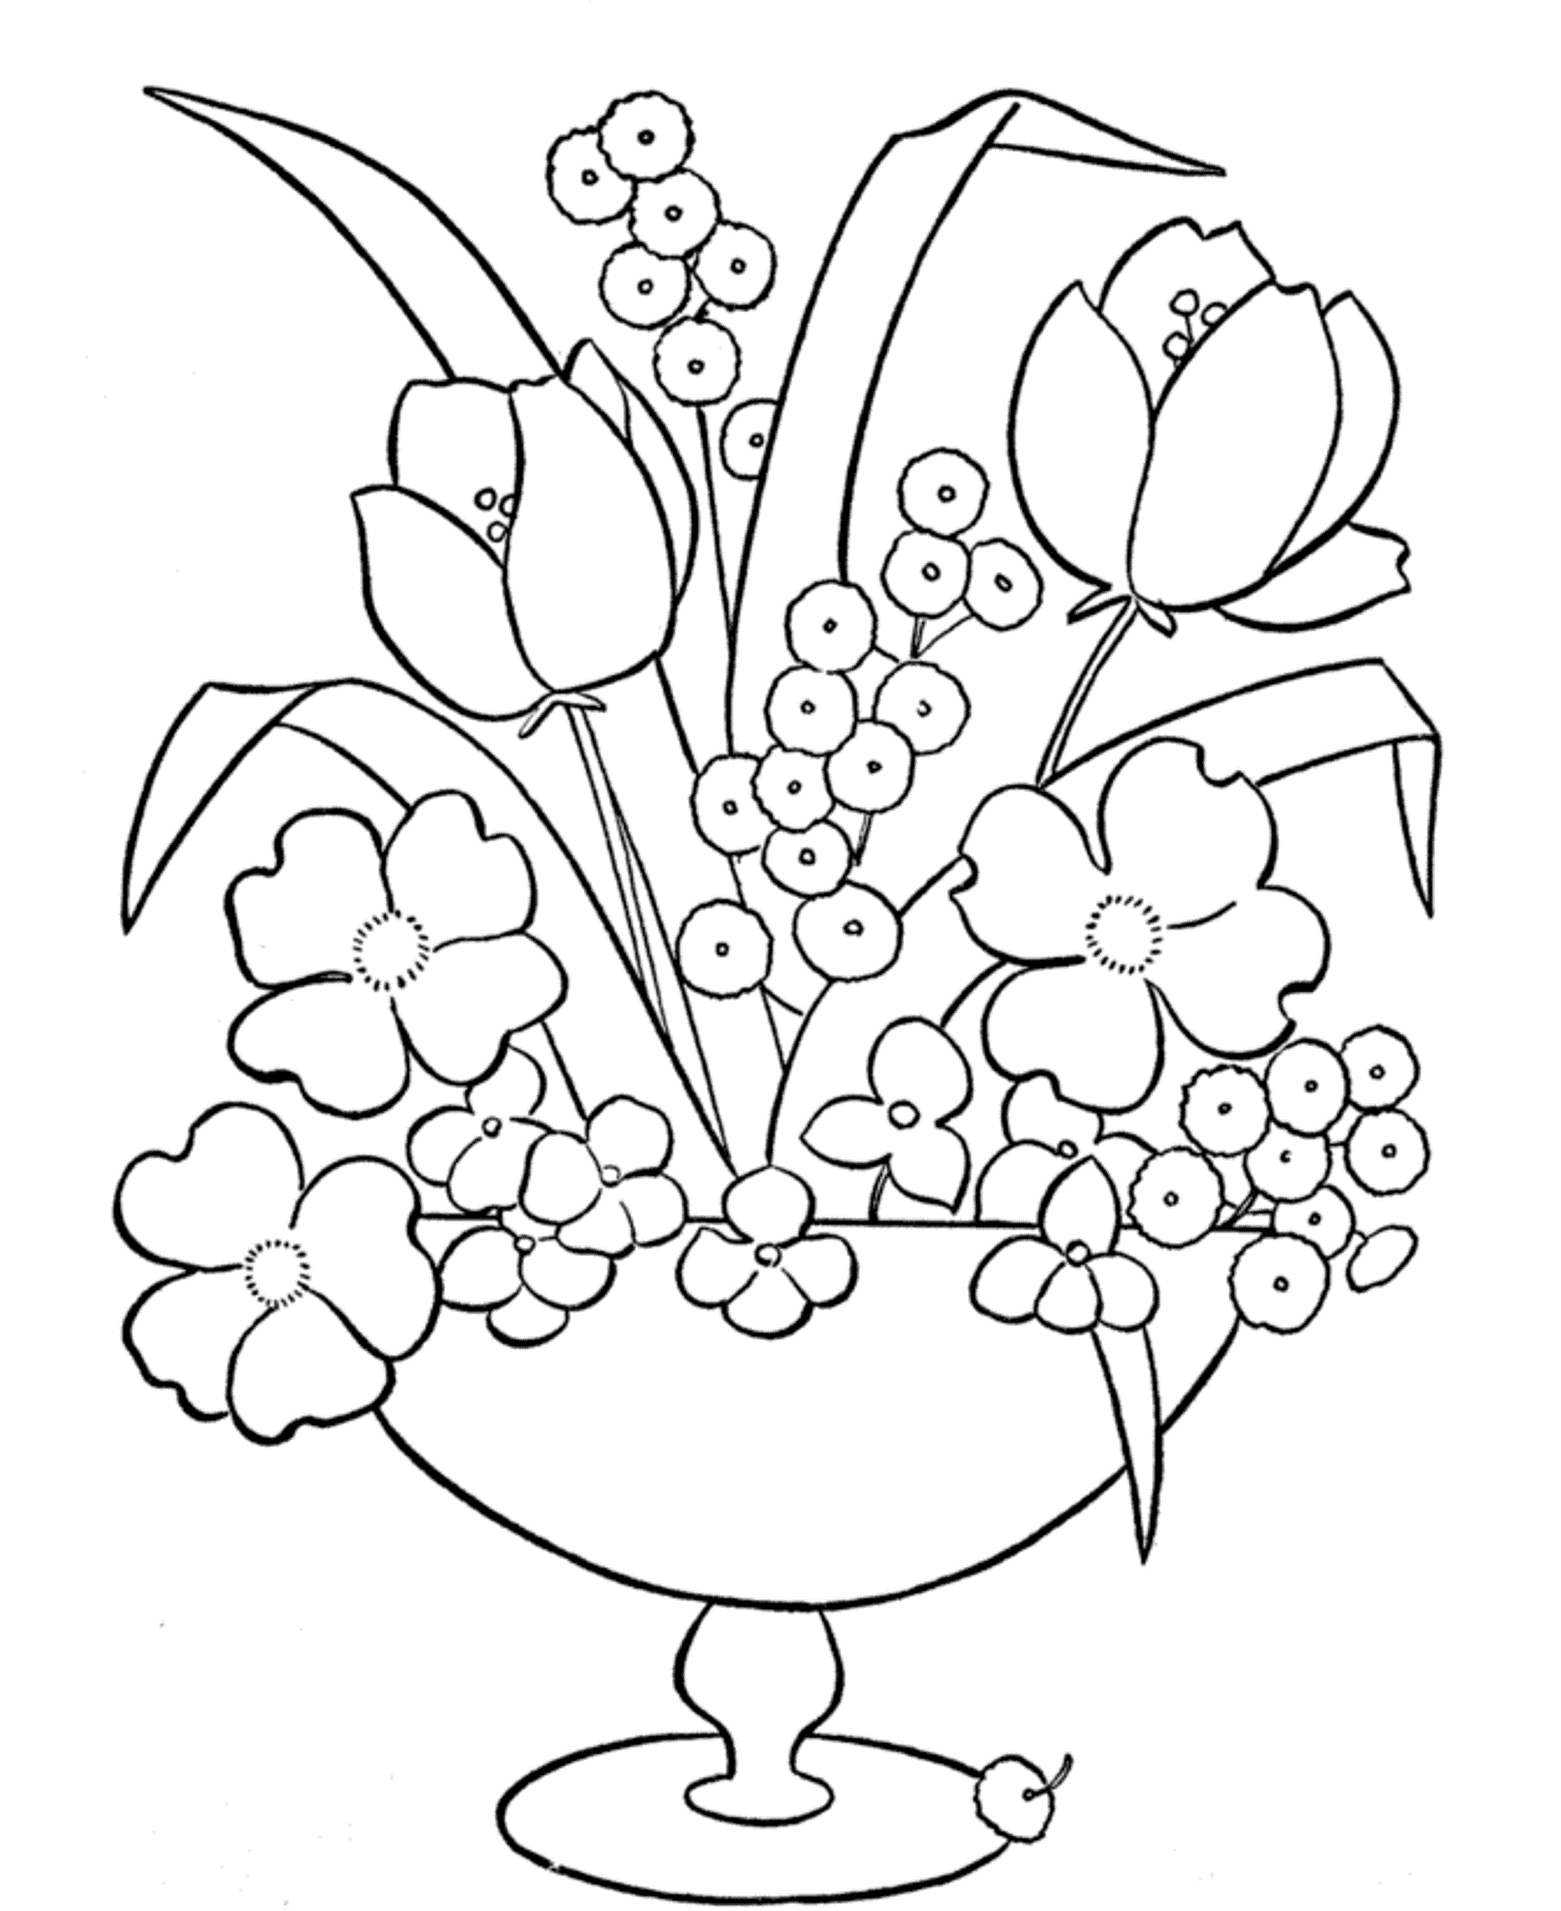 How to draw flowers - spring - in a vase - step by step